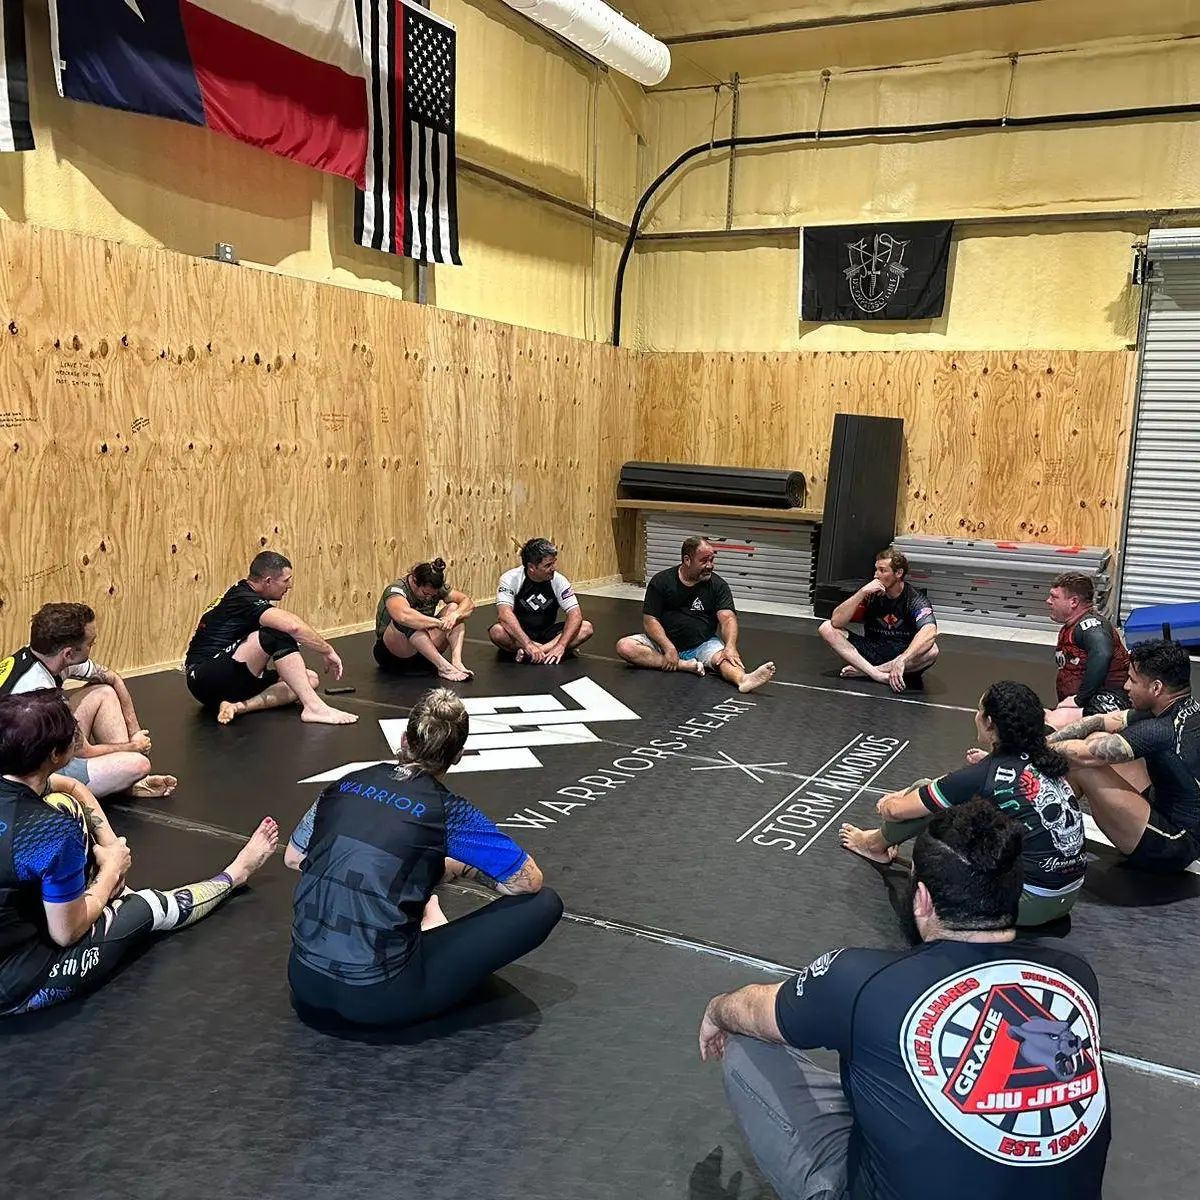 Warriors Heart - Jiu Jitsu - Warriors Heart is an addiction and PTSD treatment center for active military, veterans, and first responders. Contact us today at (844) 448-2567.